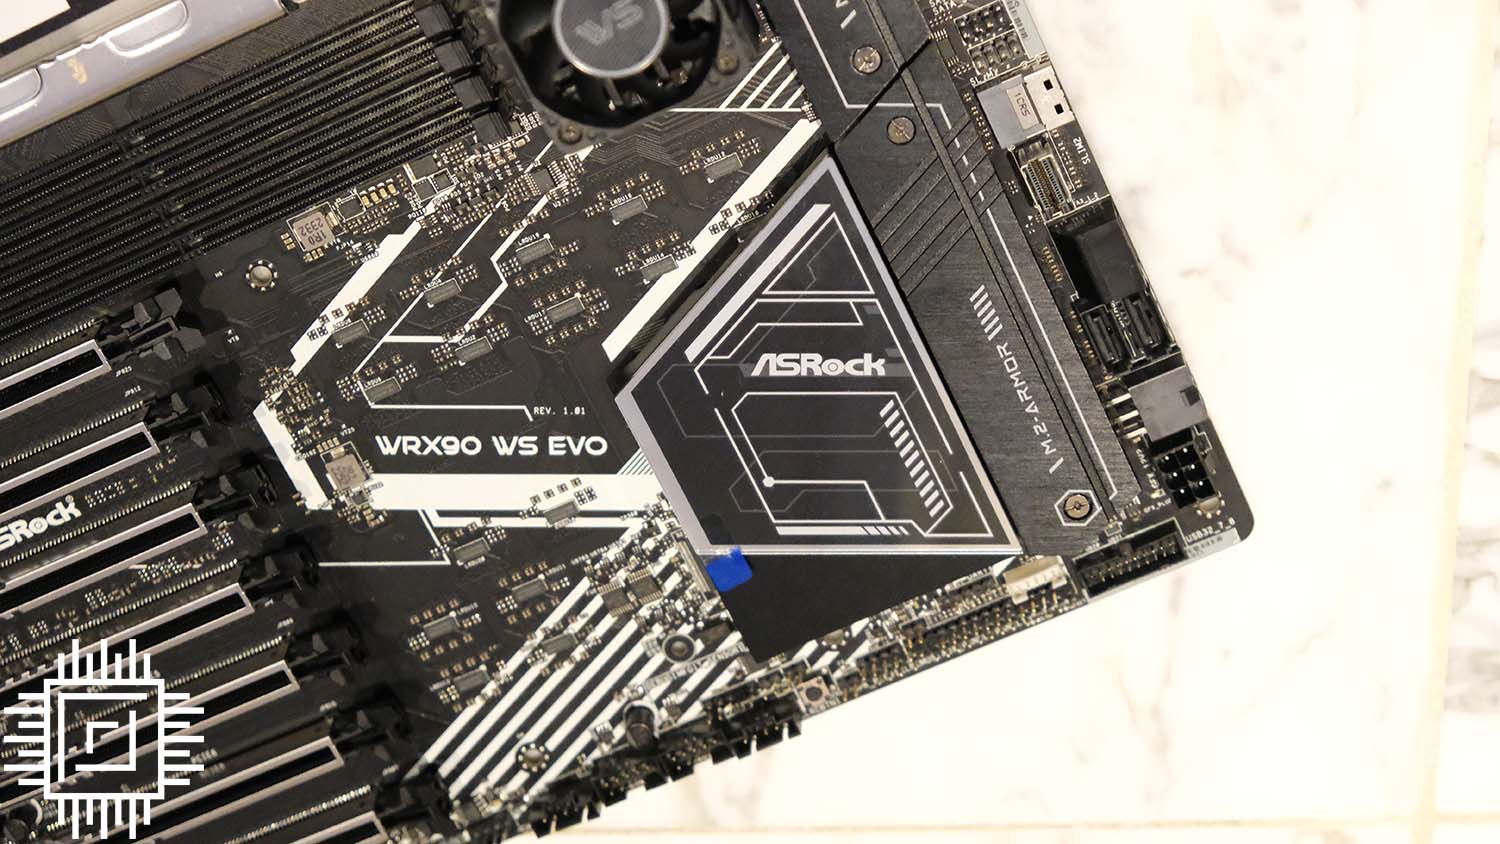 ASRock WRX90 WS Evo motherboard with massive expansion potential.